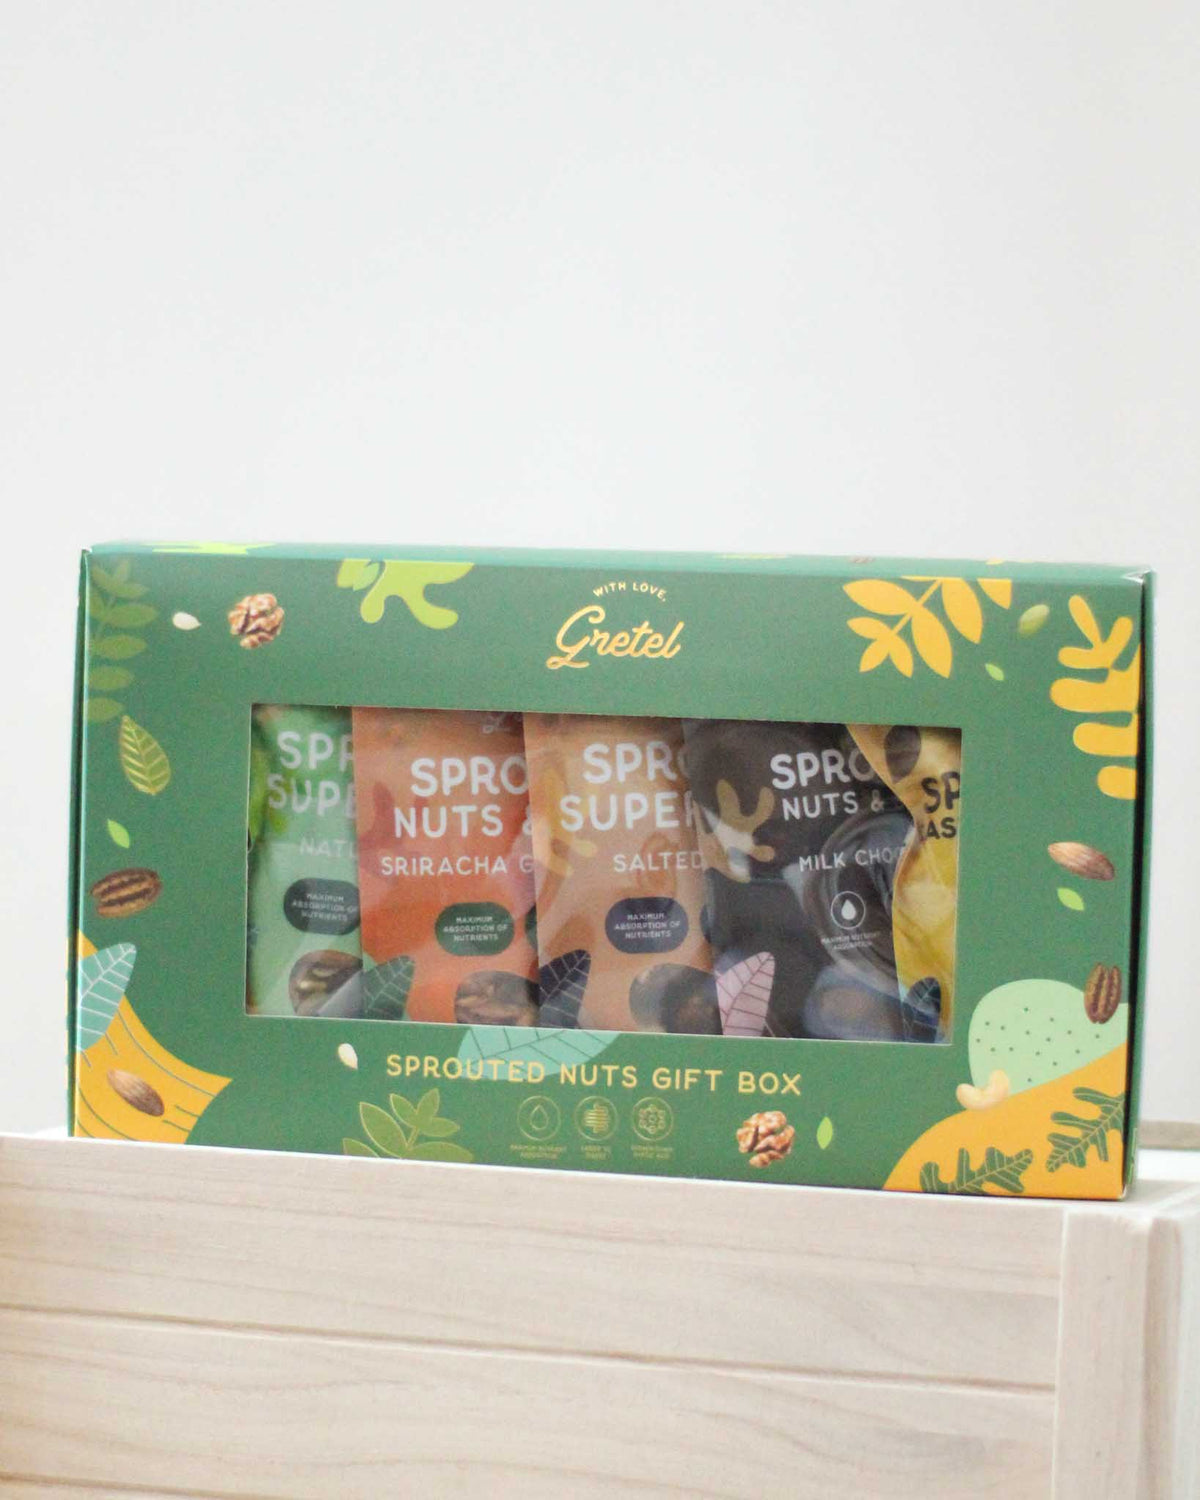 With Love, Gretel Sprouted Nuts Gift Box